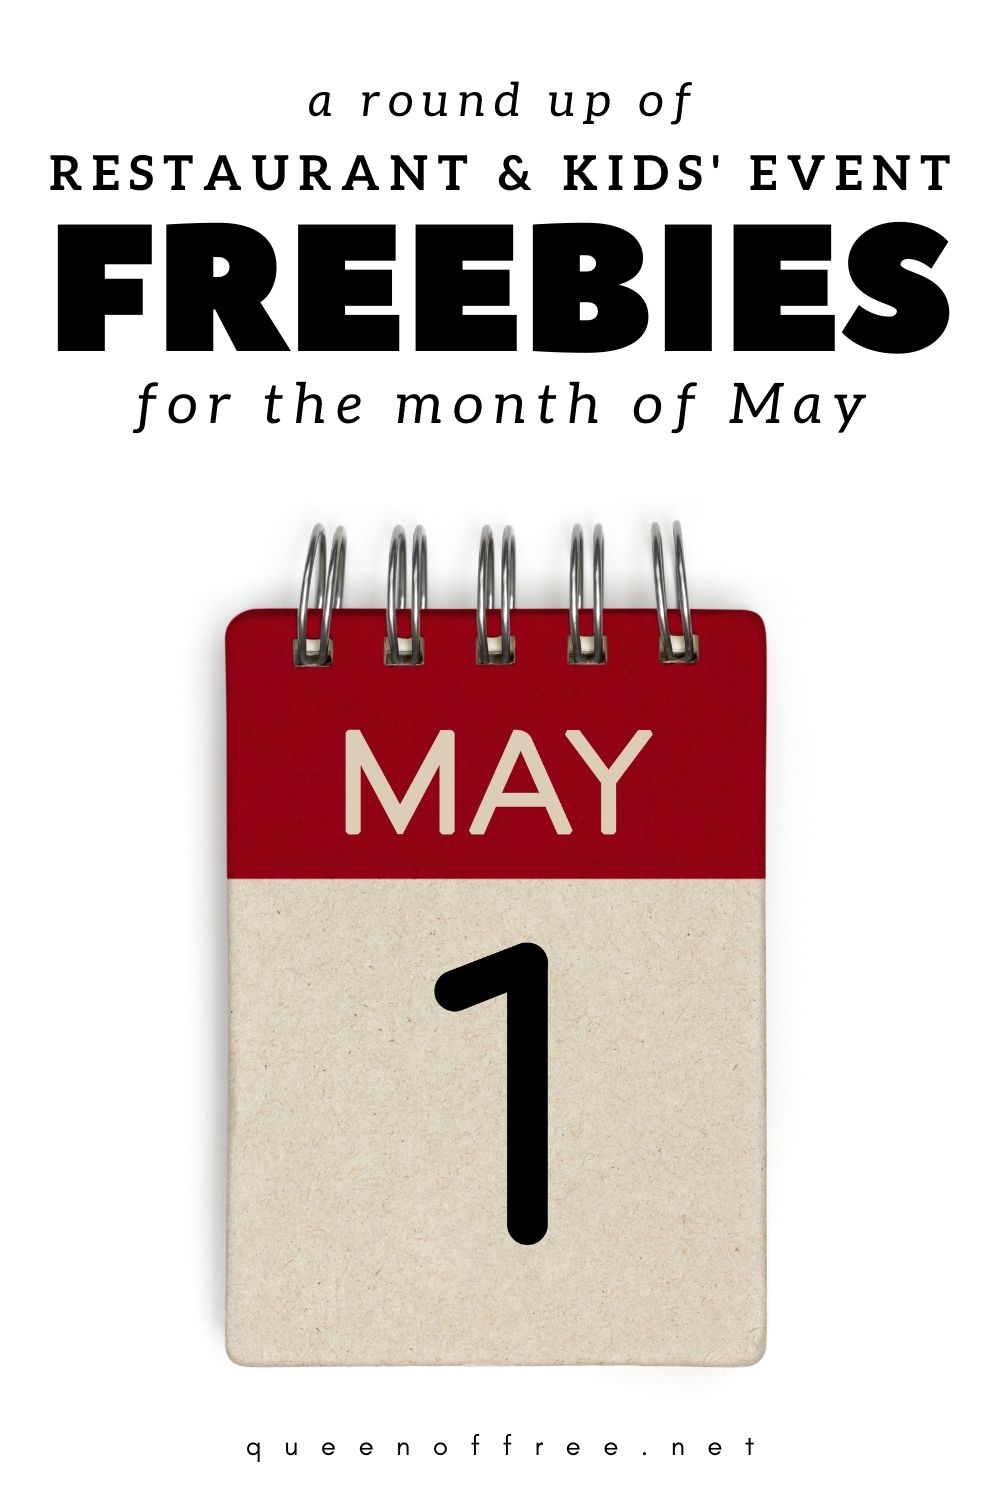 It's a full month of celebrations! Get your round up of May Freebies at restaurants and for special events right here.